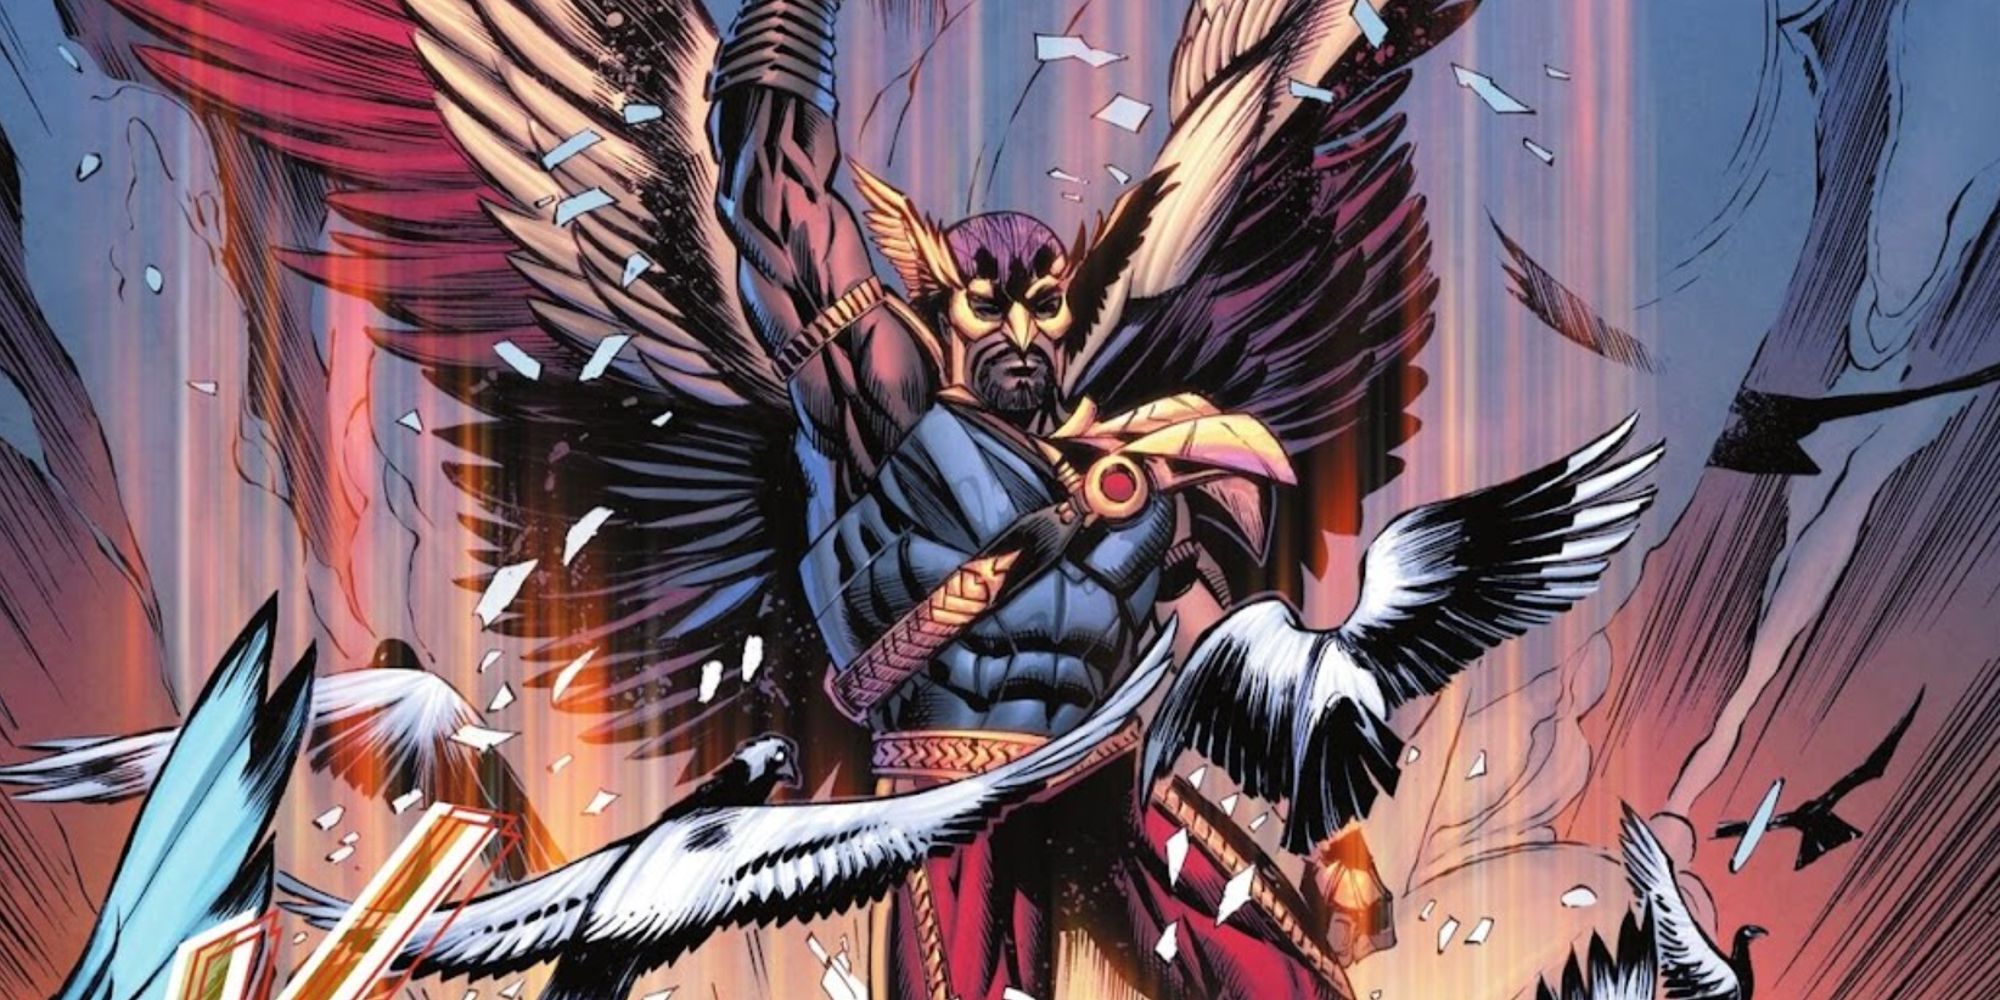 Hawkman flies through a roof in The Justice Society Files Hawkman #1